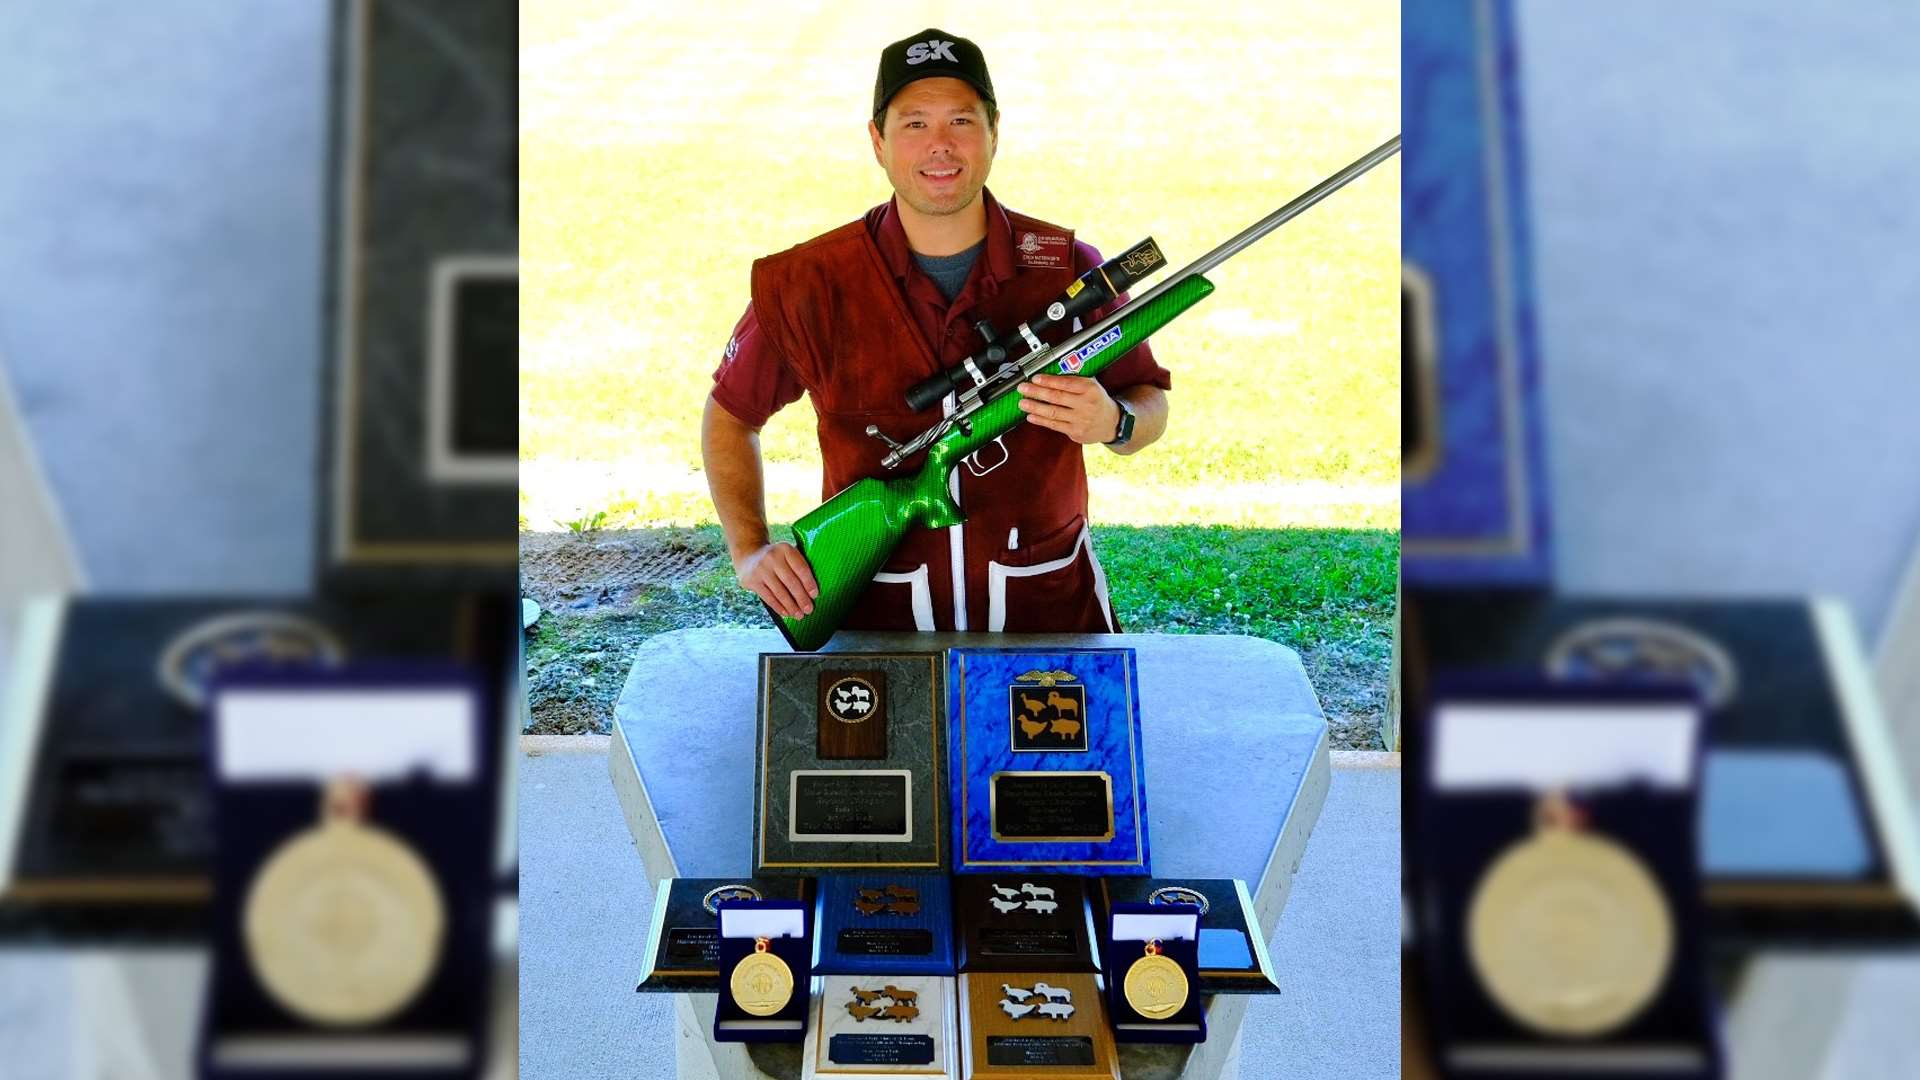 Erich Mietenkorte with rifle and match awards